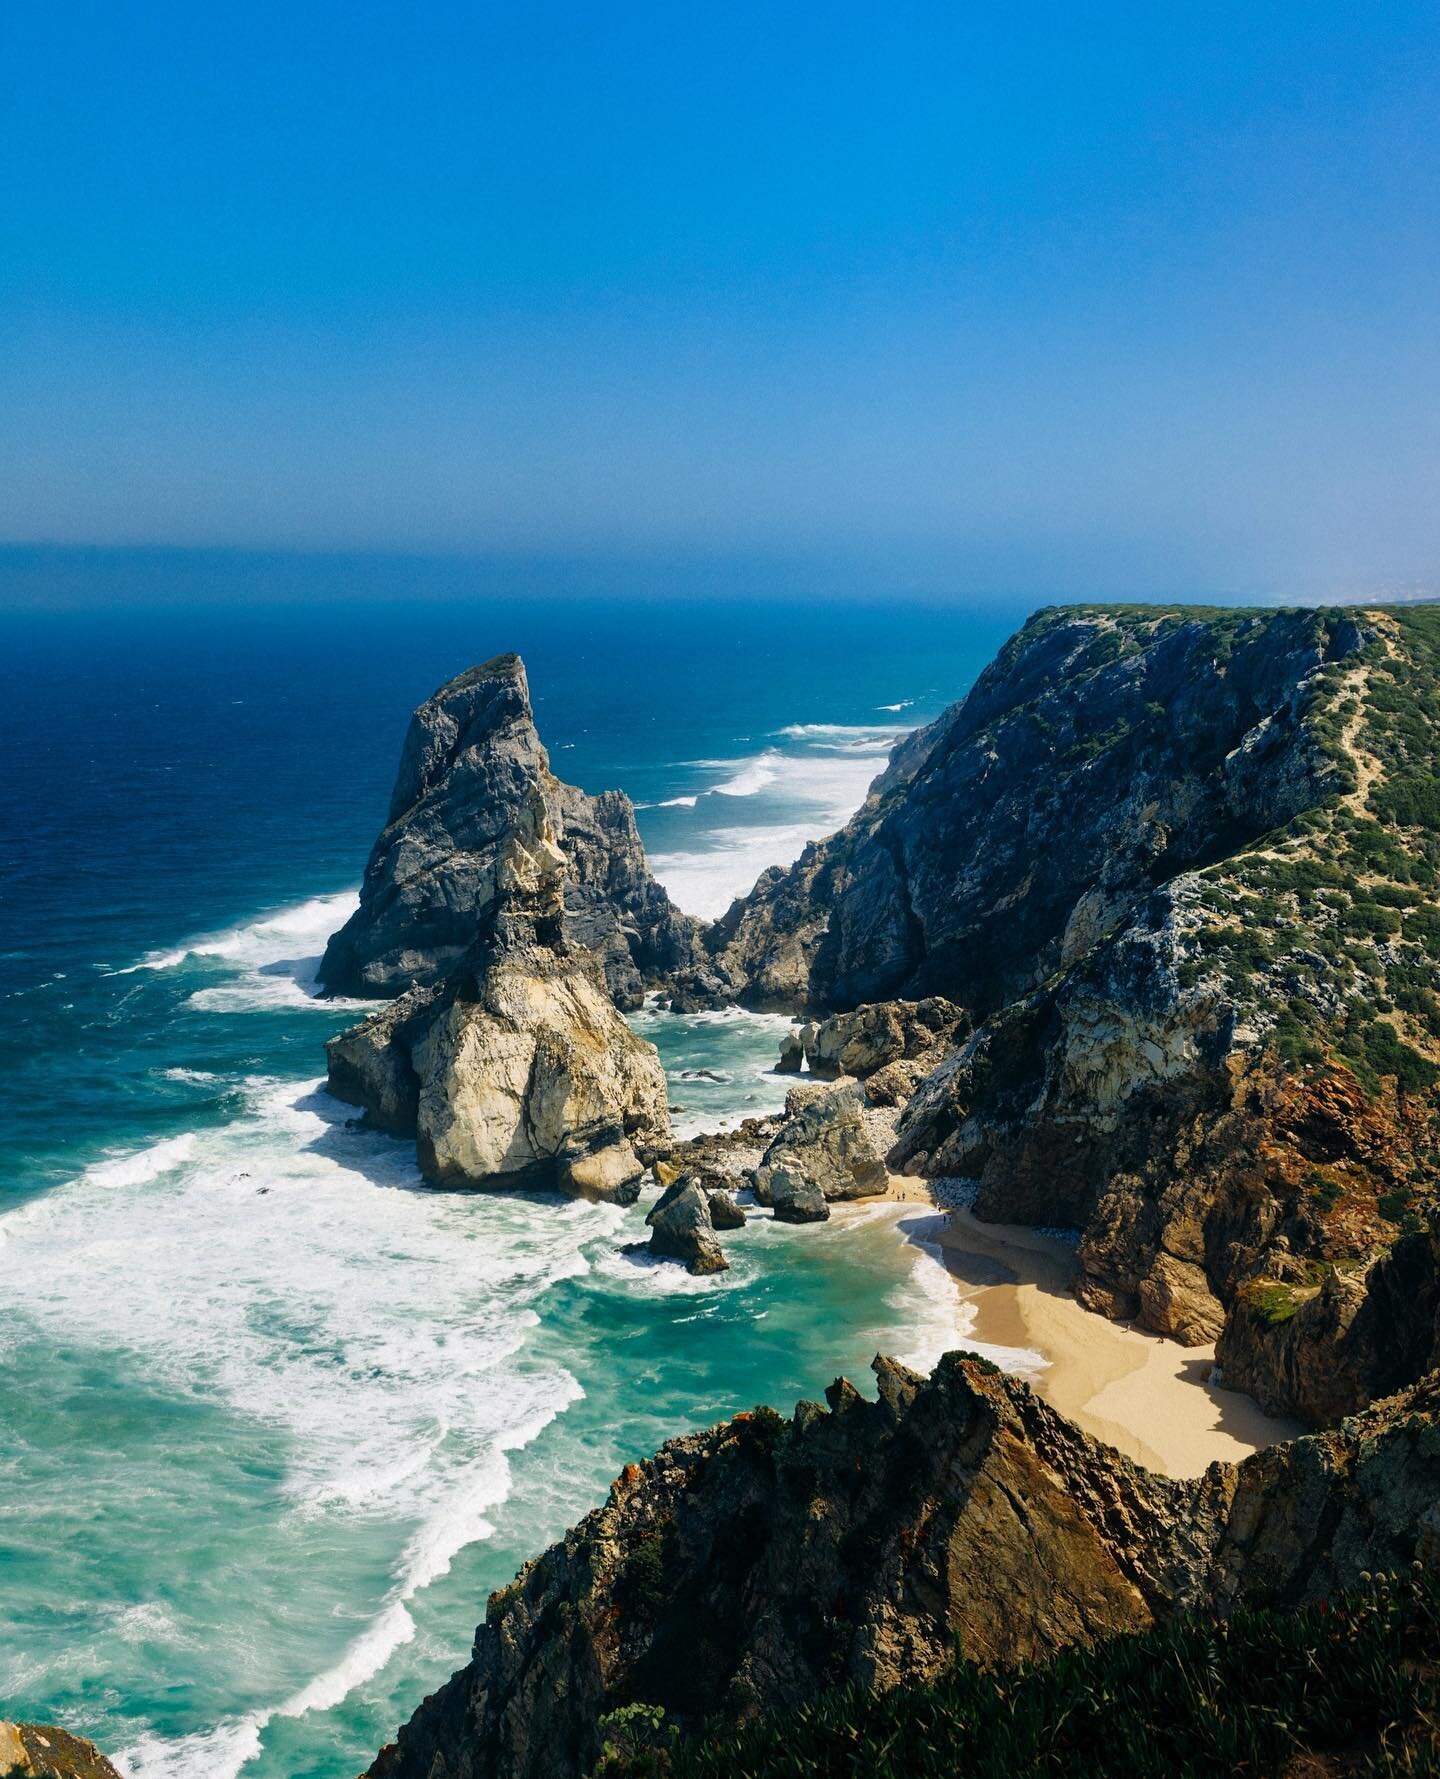 Cabo da Roca in Sintra Mountains of Portugal - the western most point in Europe.⁠
⁠
As I gather my thoughts on what the past week was like...an amazing opportunity and experience shooting @sammmonte + @arseniogs wedding in Portugal, an experience tha